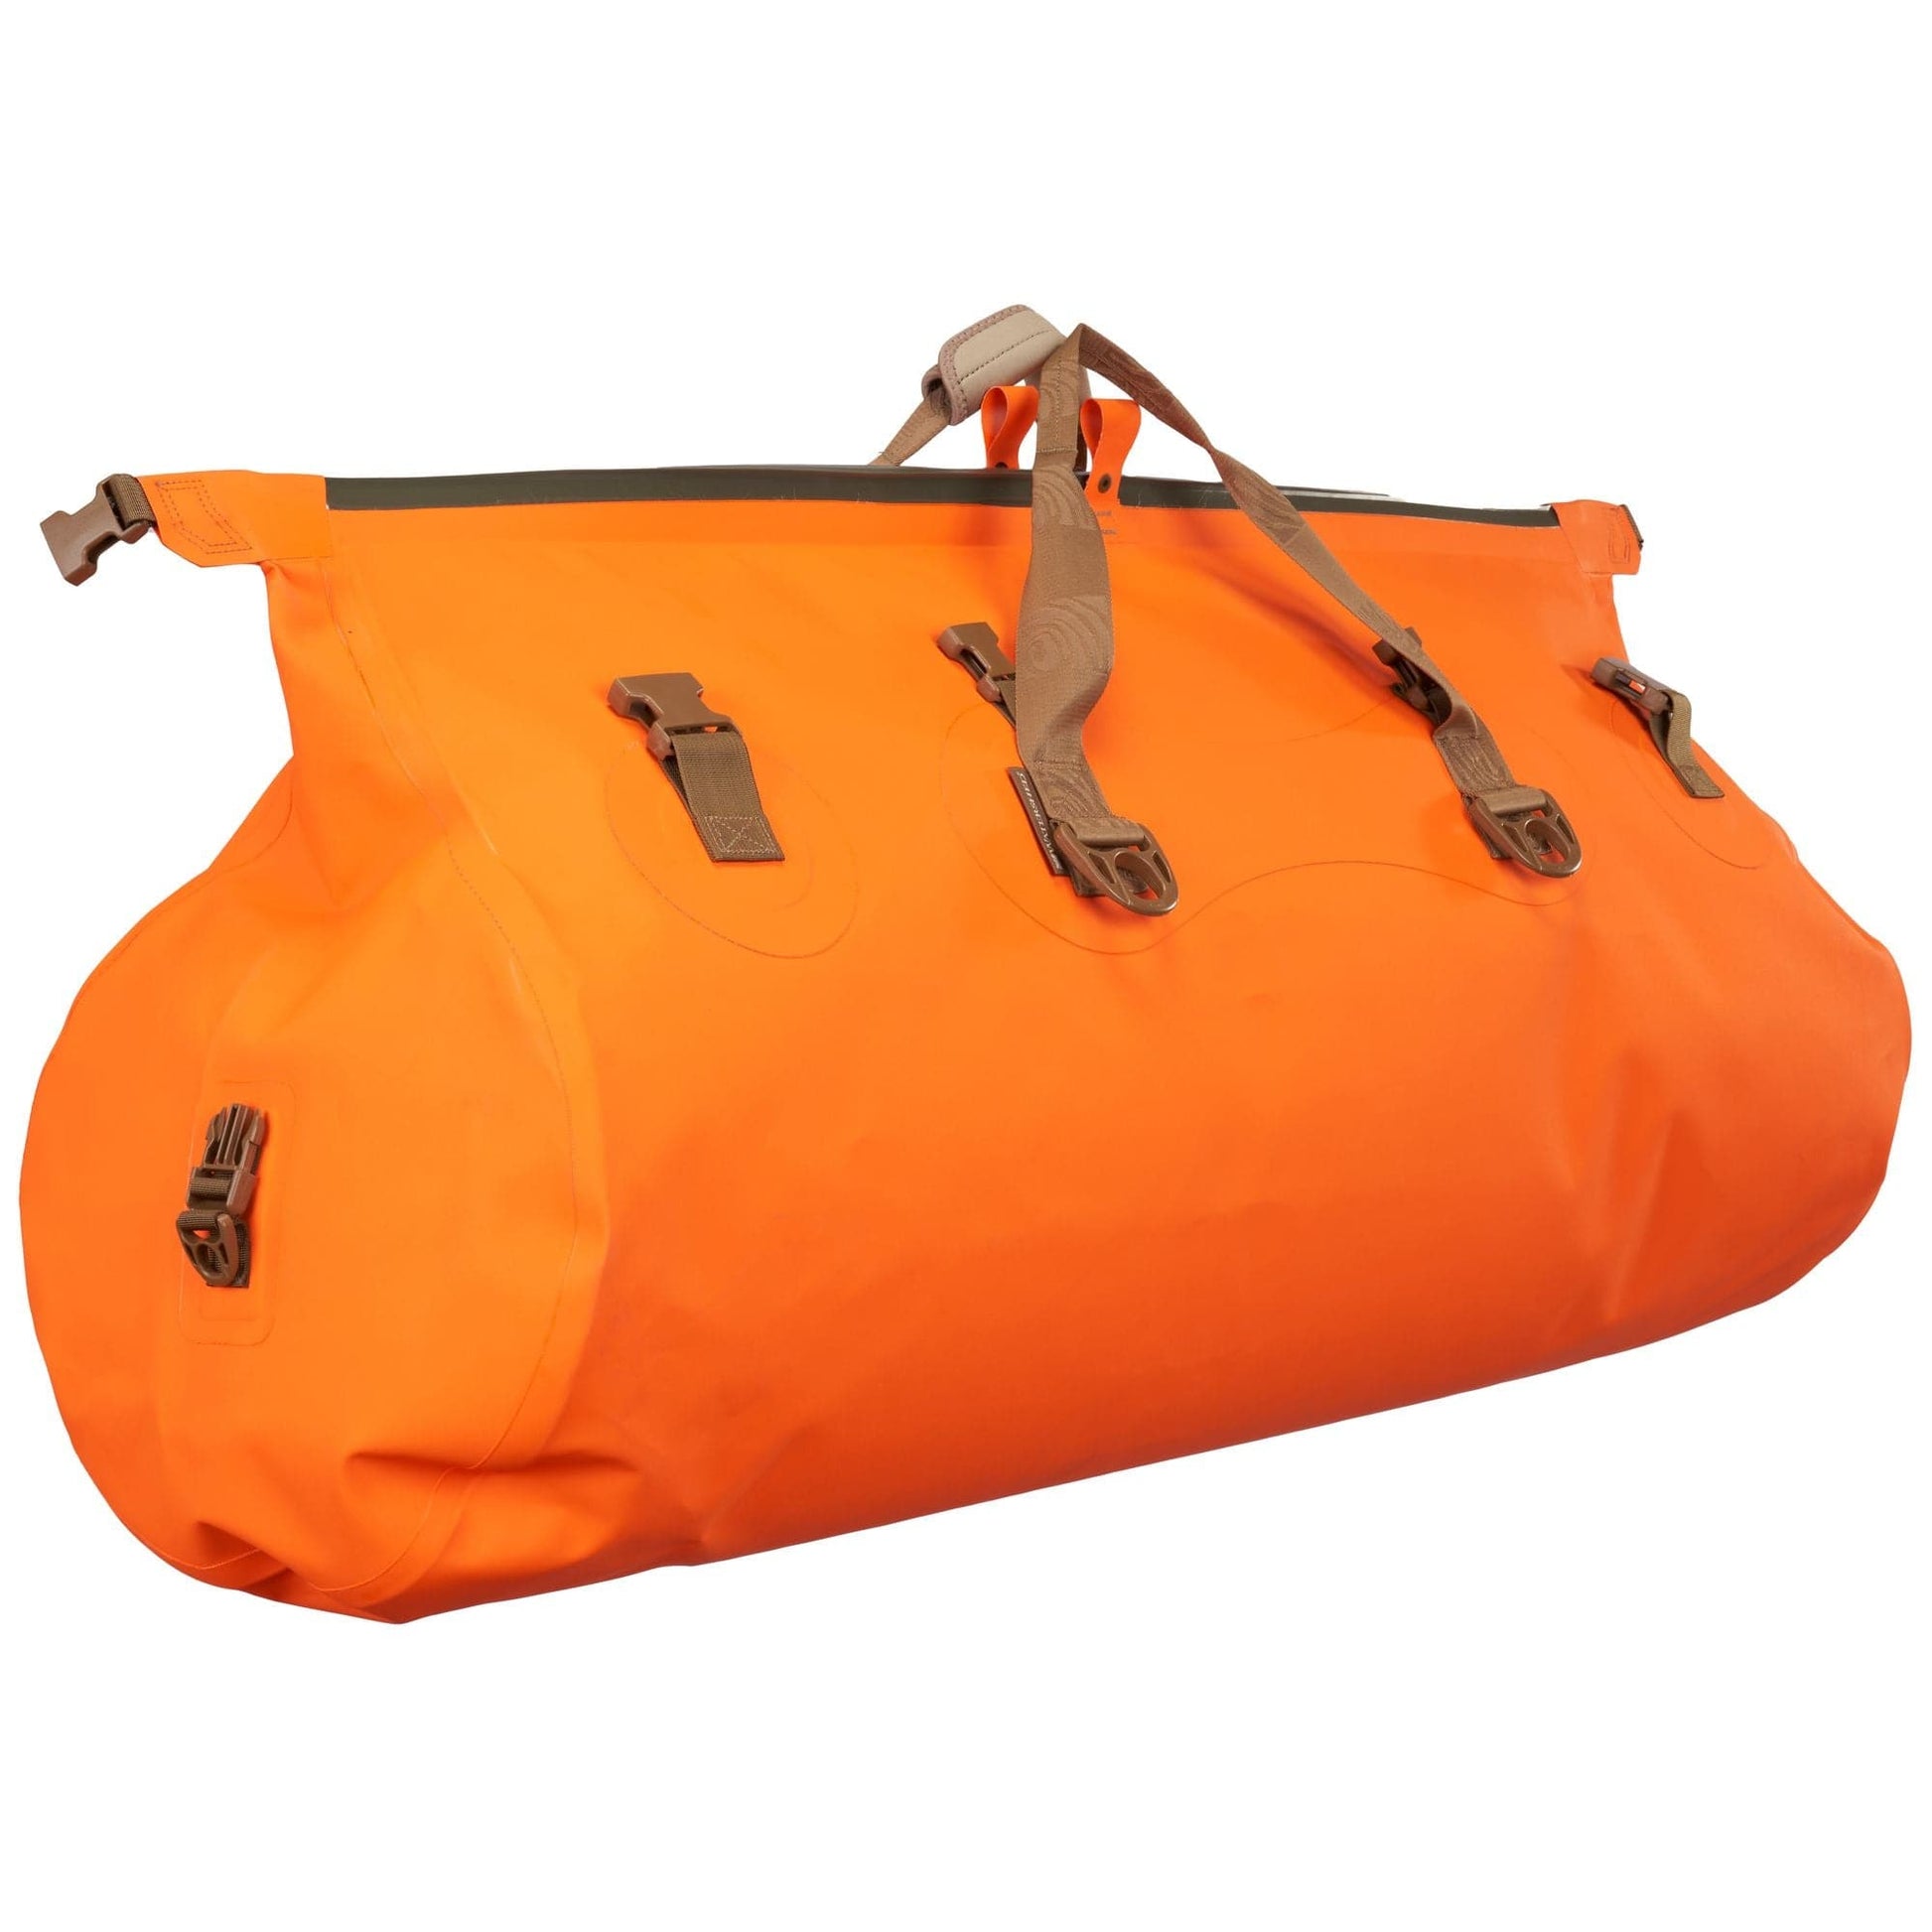 Featuring the Mississippi Duffel dry bag manufactured by Watershed shown here from a second angle.